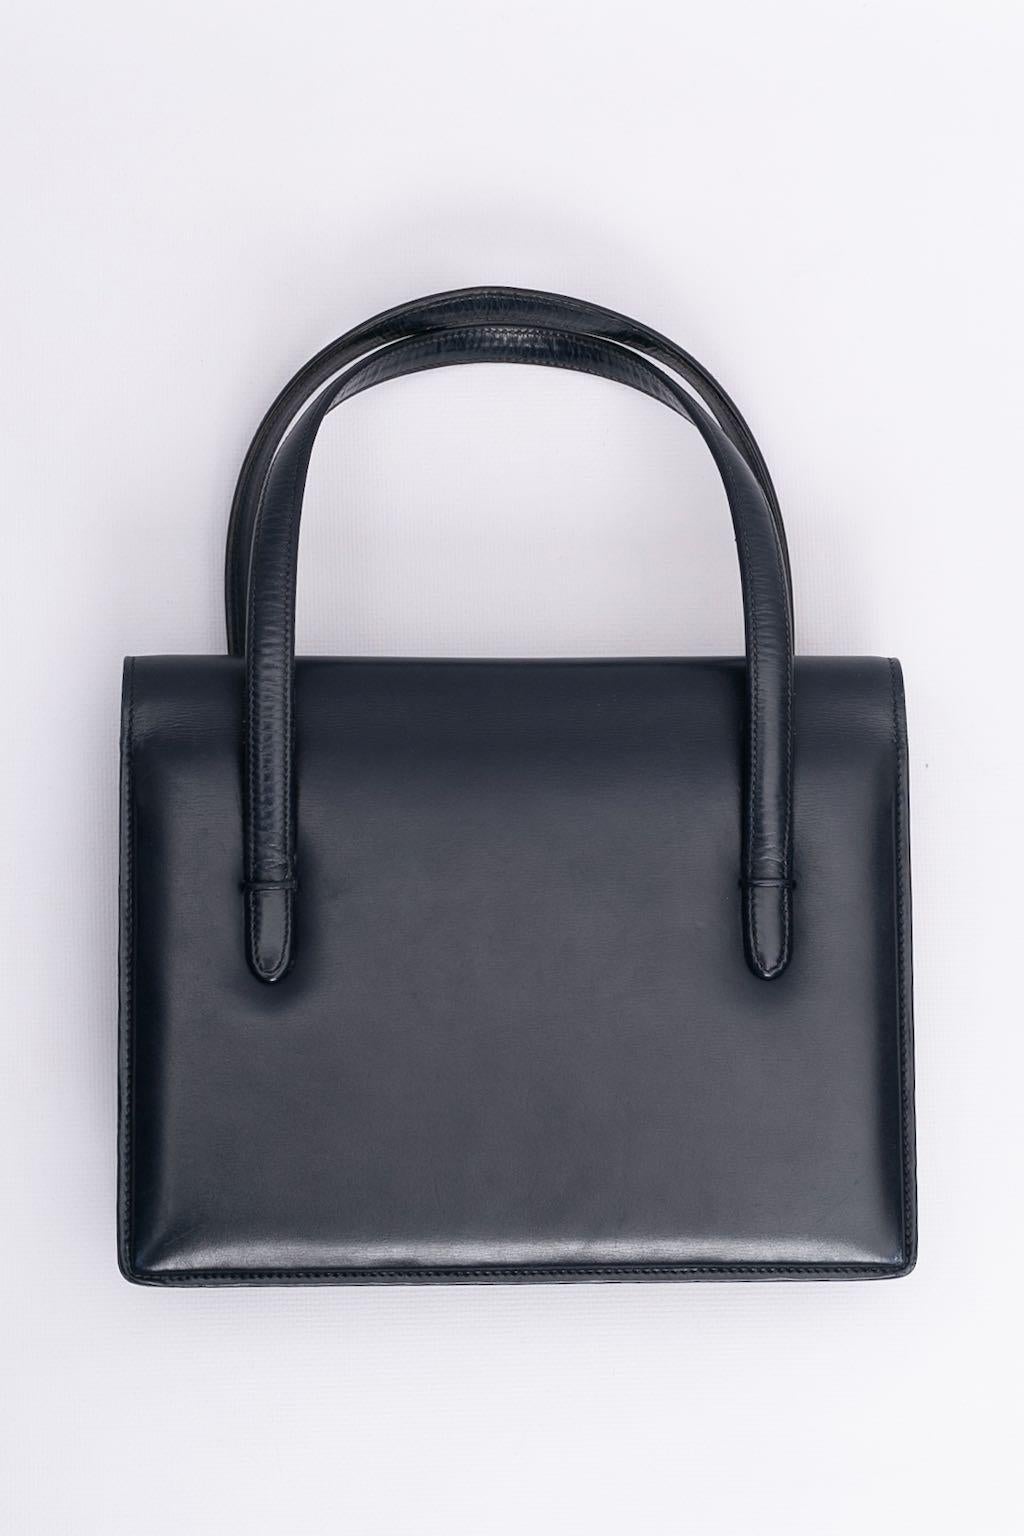 Gucci (Made in Italy) Handbag in navy blue leather. Leather lining, four pockets including one with a zip closure.

Additional information: 

Dimensions: 
Length: 23 cm (9.05